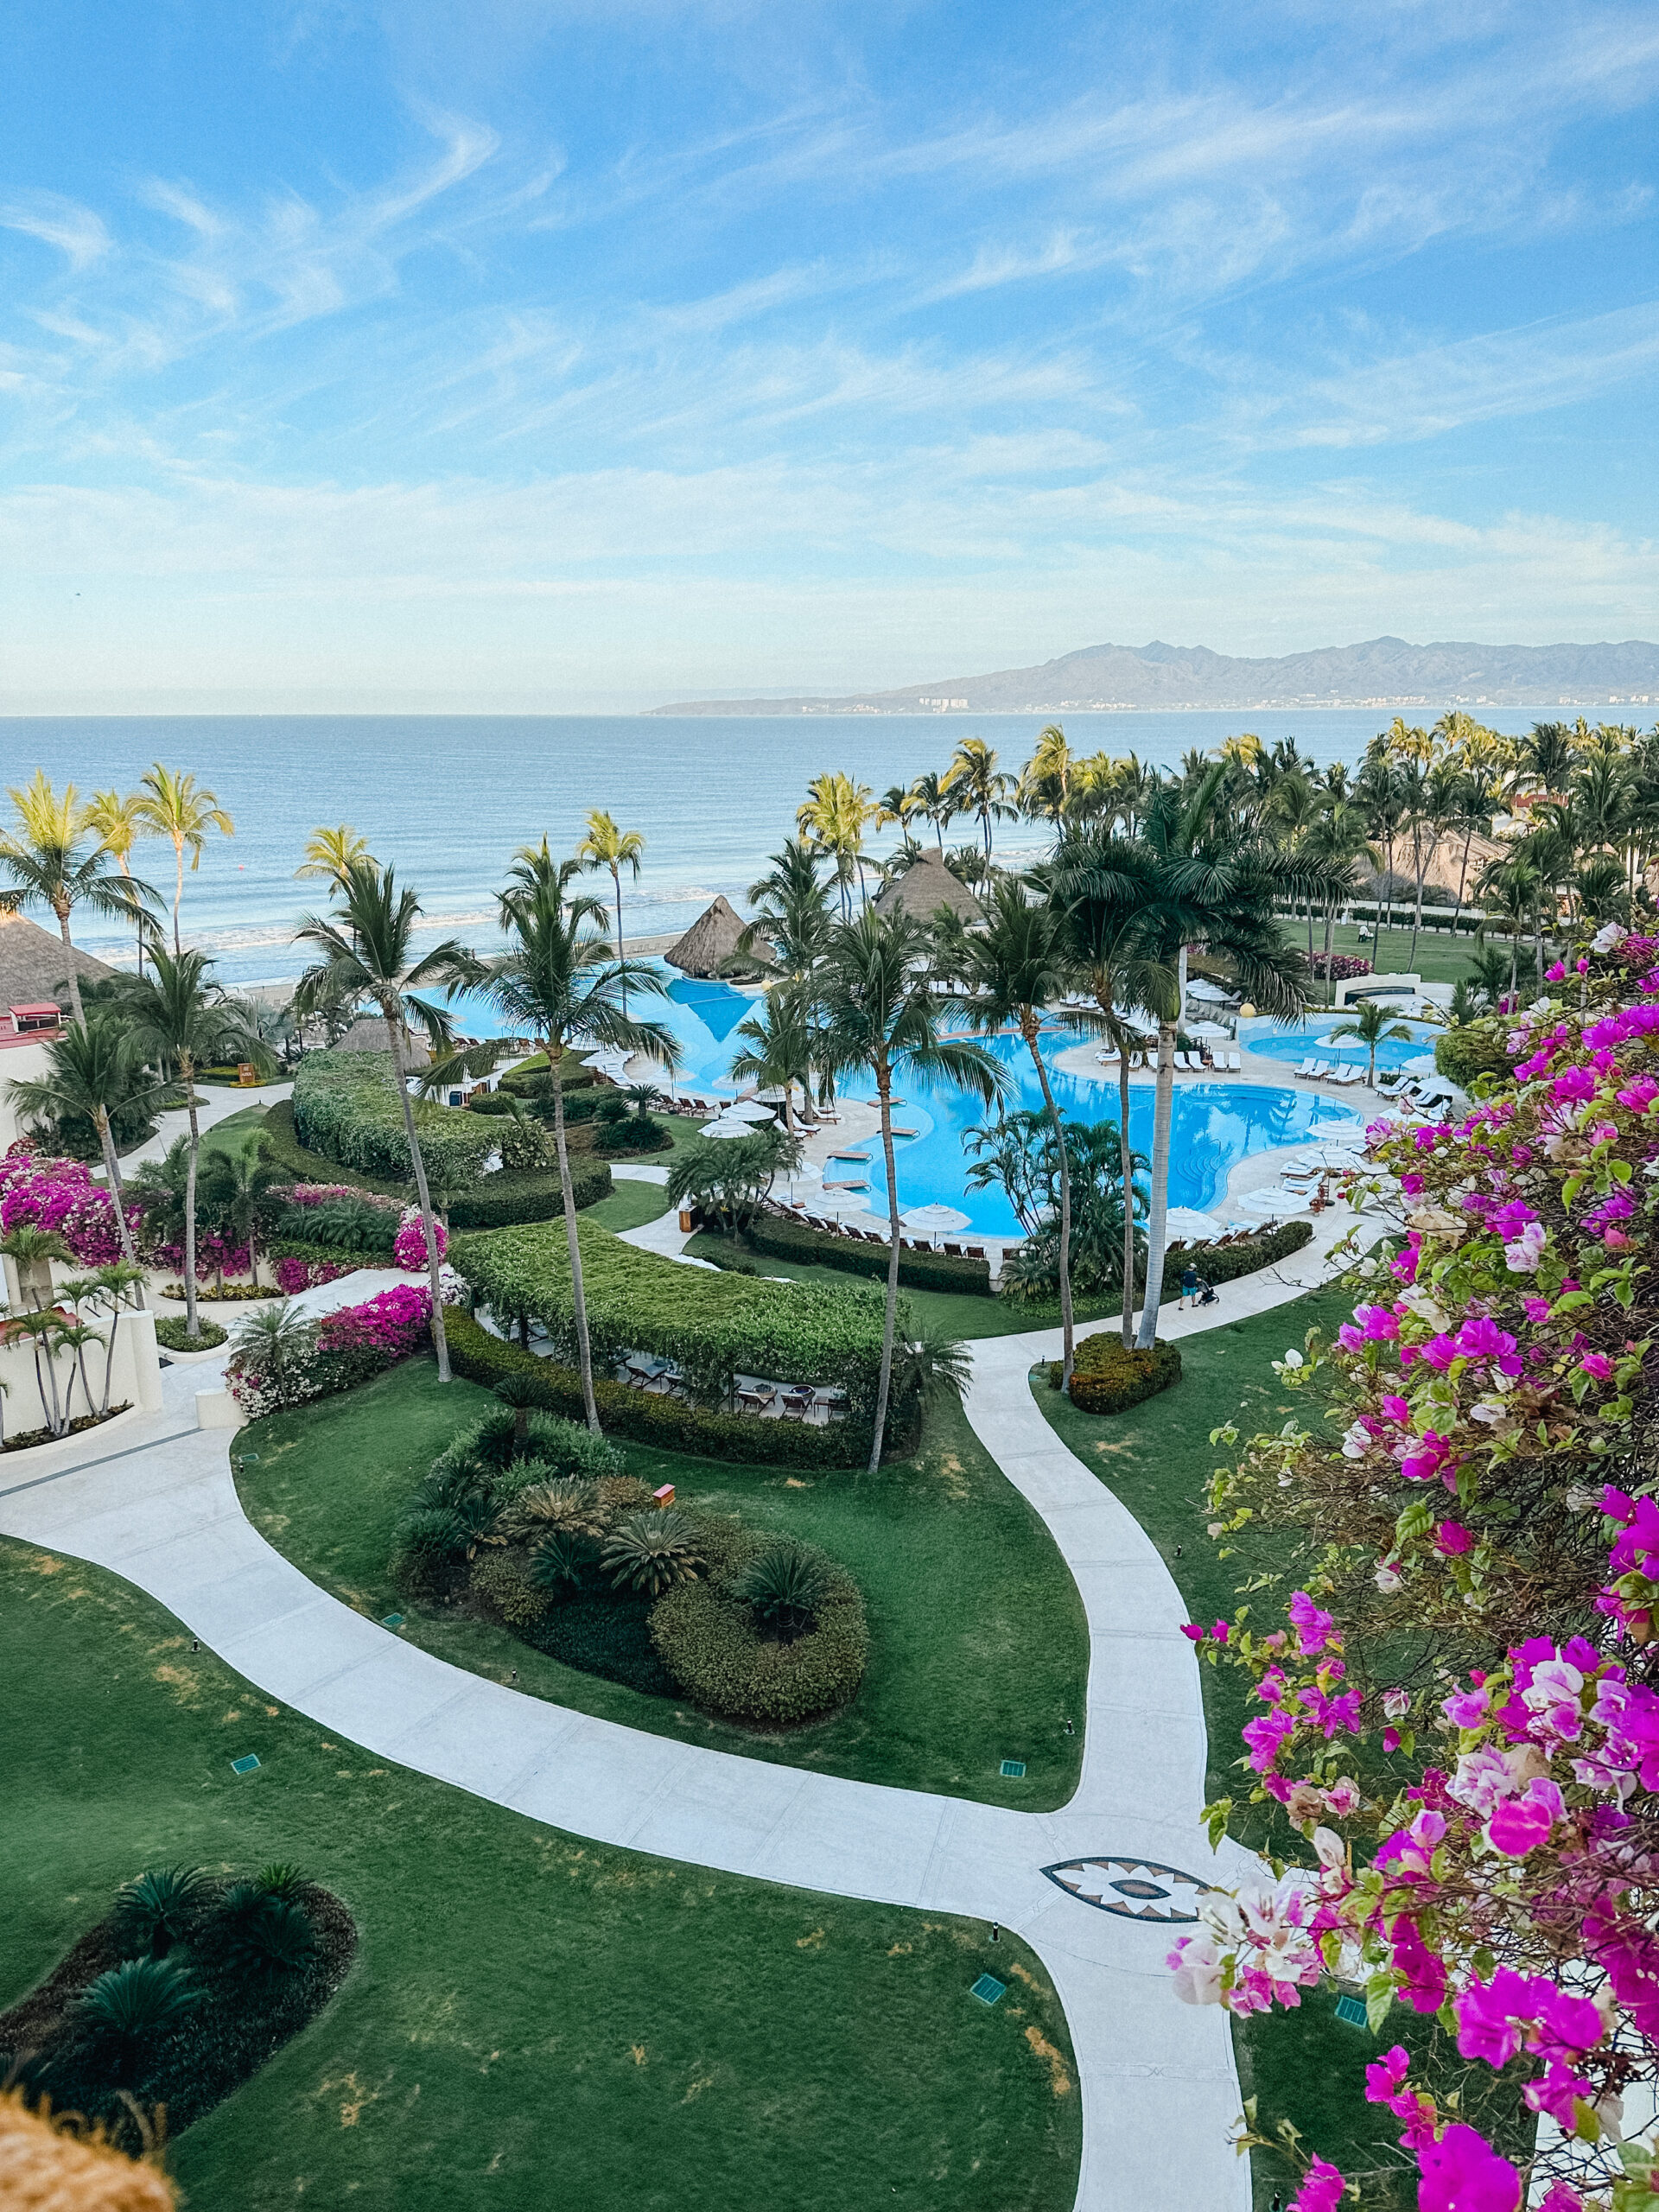 Connecticut life and style blogger Lauren McBride shares her family's stay at Grand Velas Riviera Nayarit all-inclusive luxury resort.